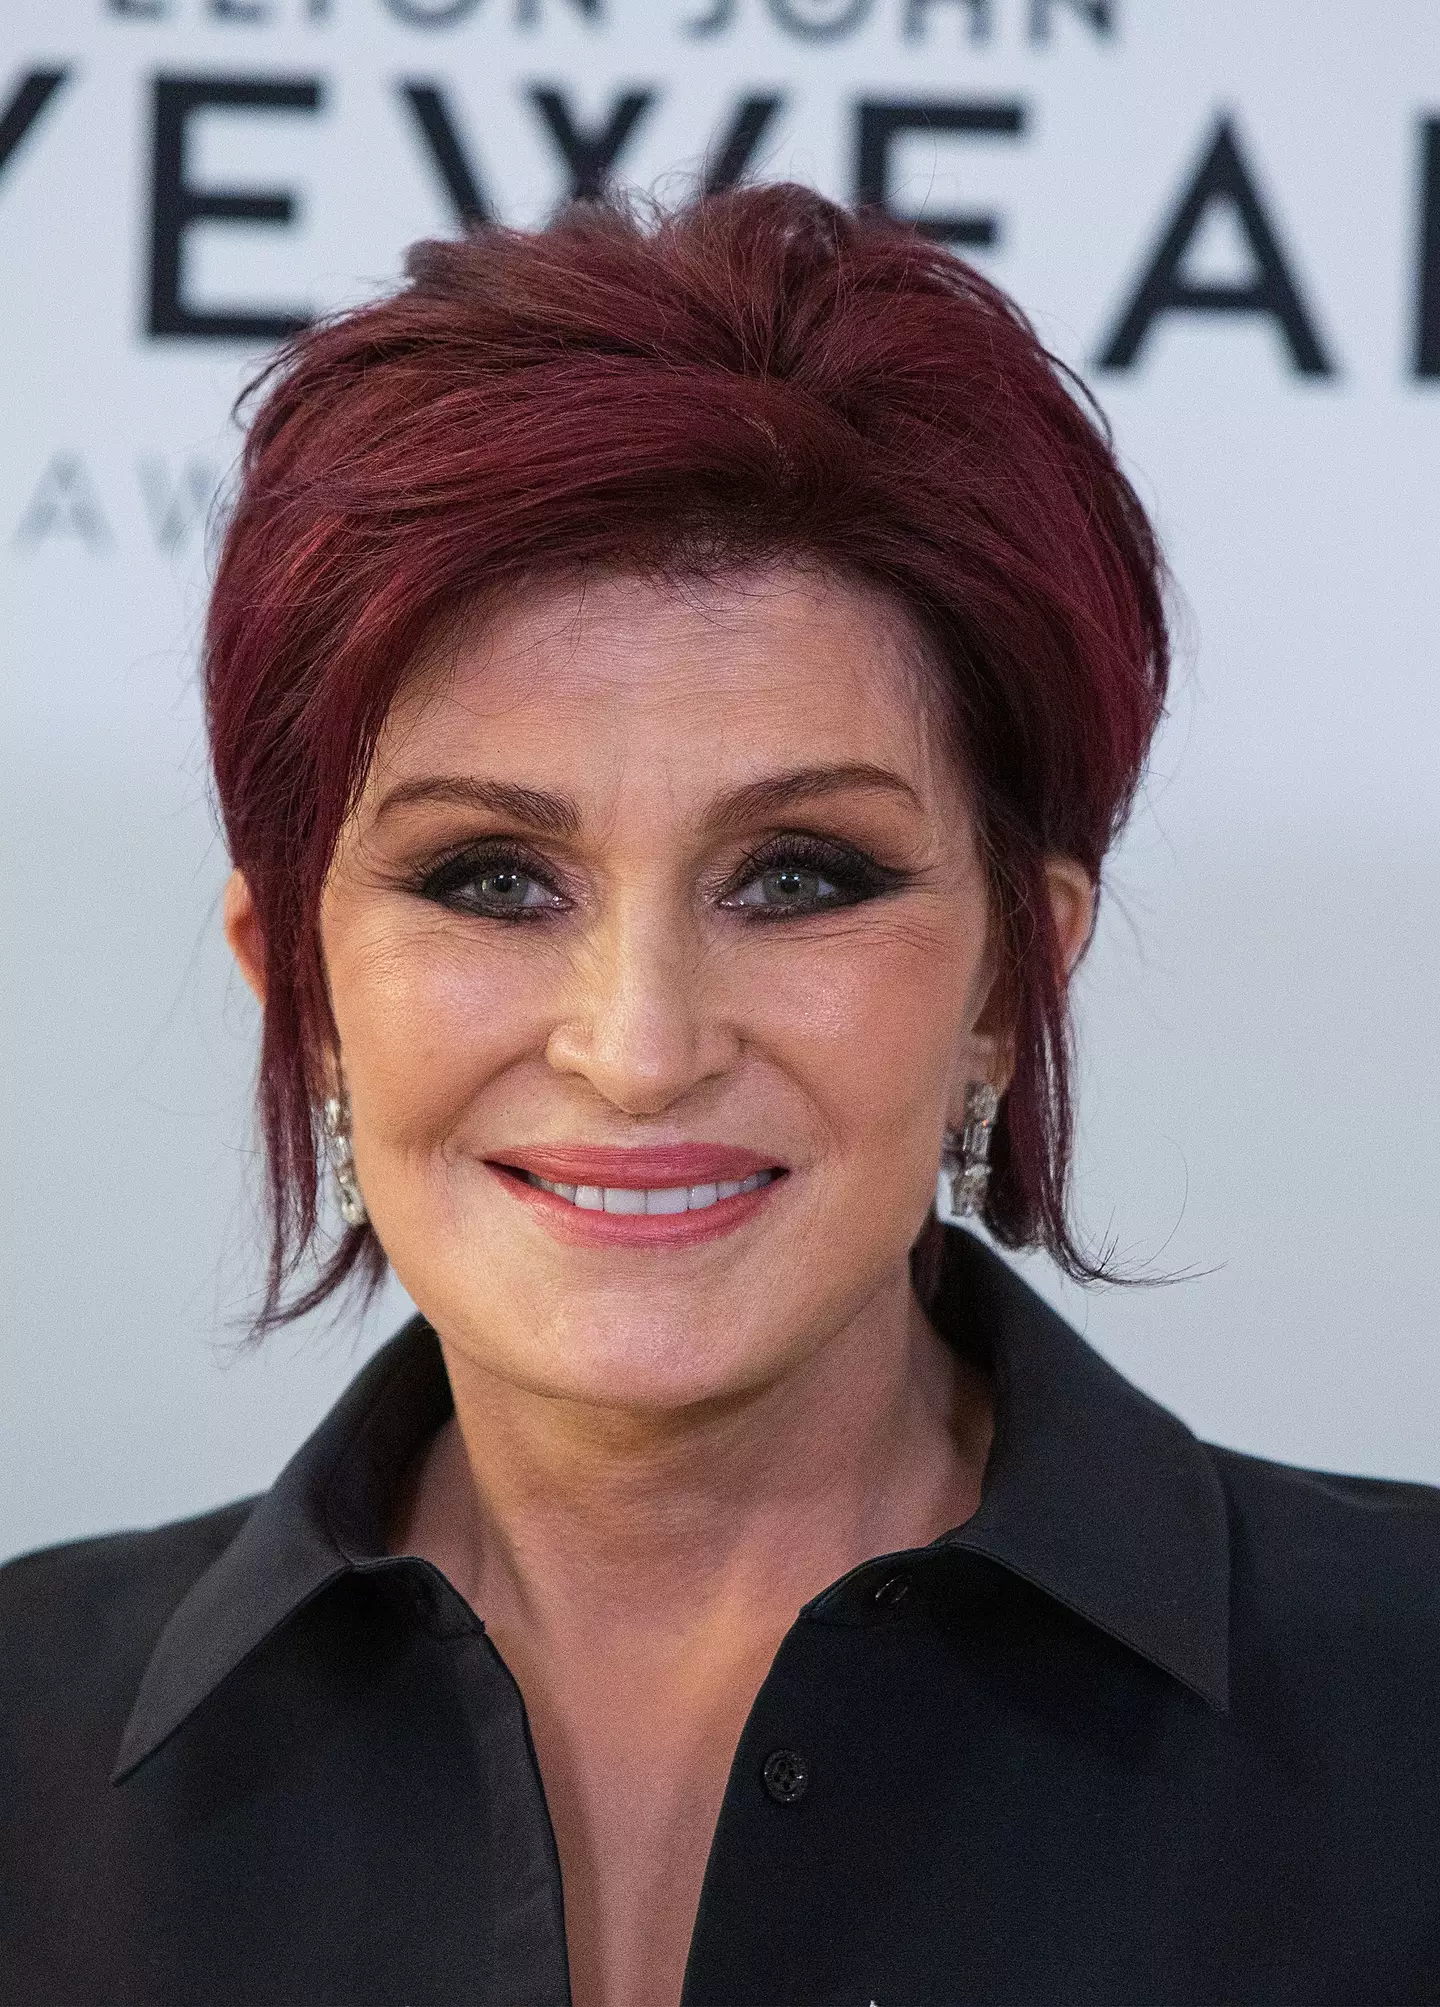 Sharon Osbourne wants her money back from the BLM movement.